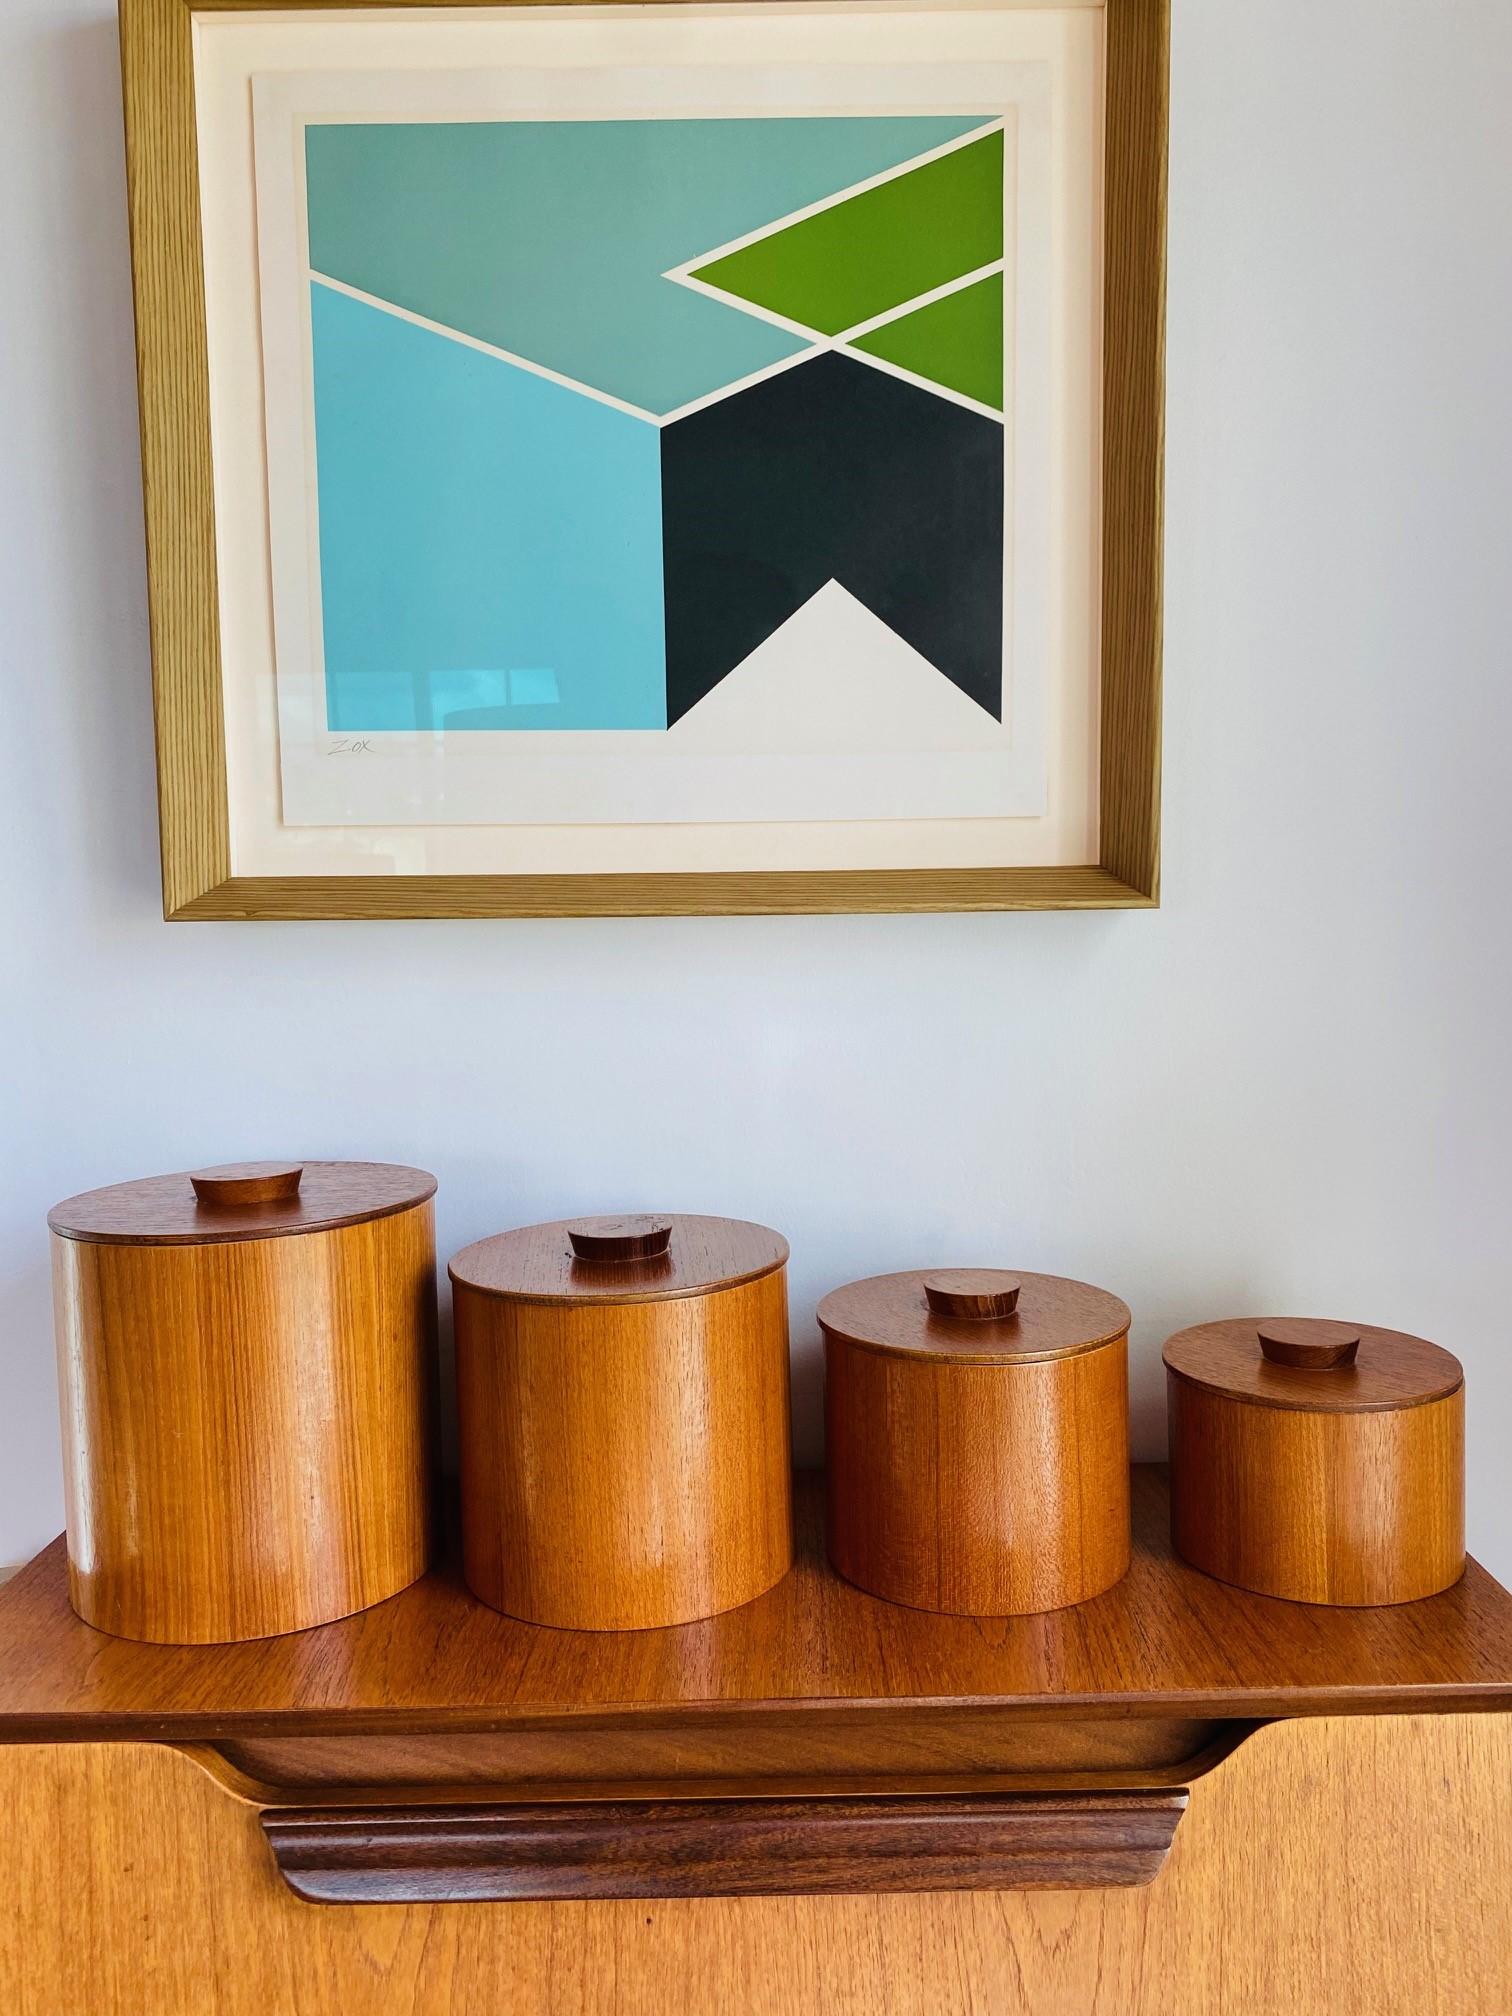 Beautiful set of teak canisters.  This vintage set is aesthetically pleasing visually and current, as it is full of purpose.  The practicality of the nesting ability adds excitement to their placement and use.  The minimalist nature makes it modern